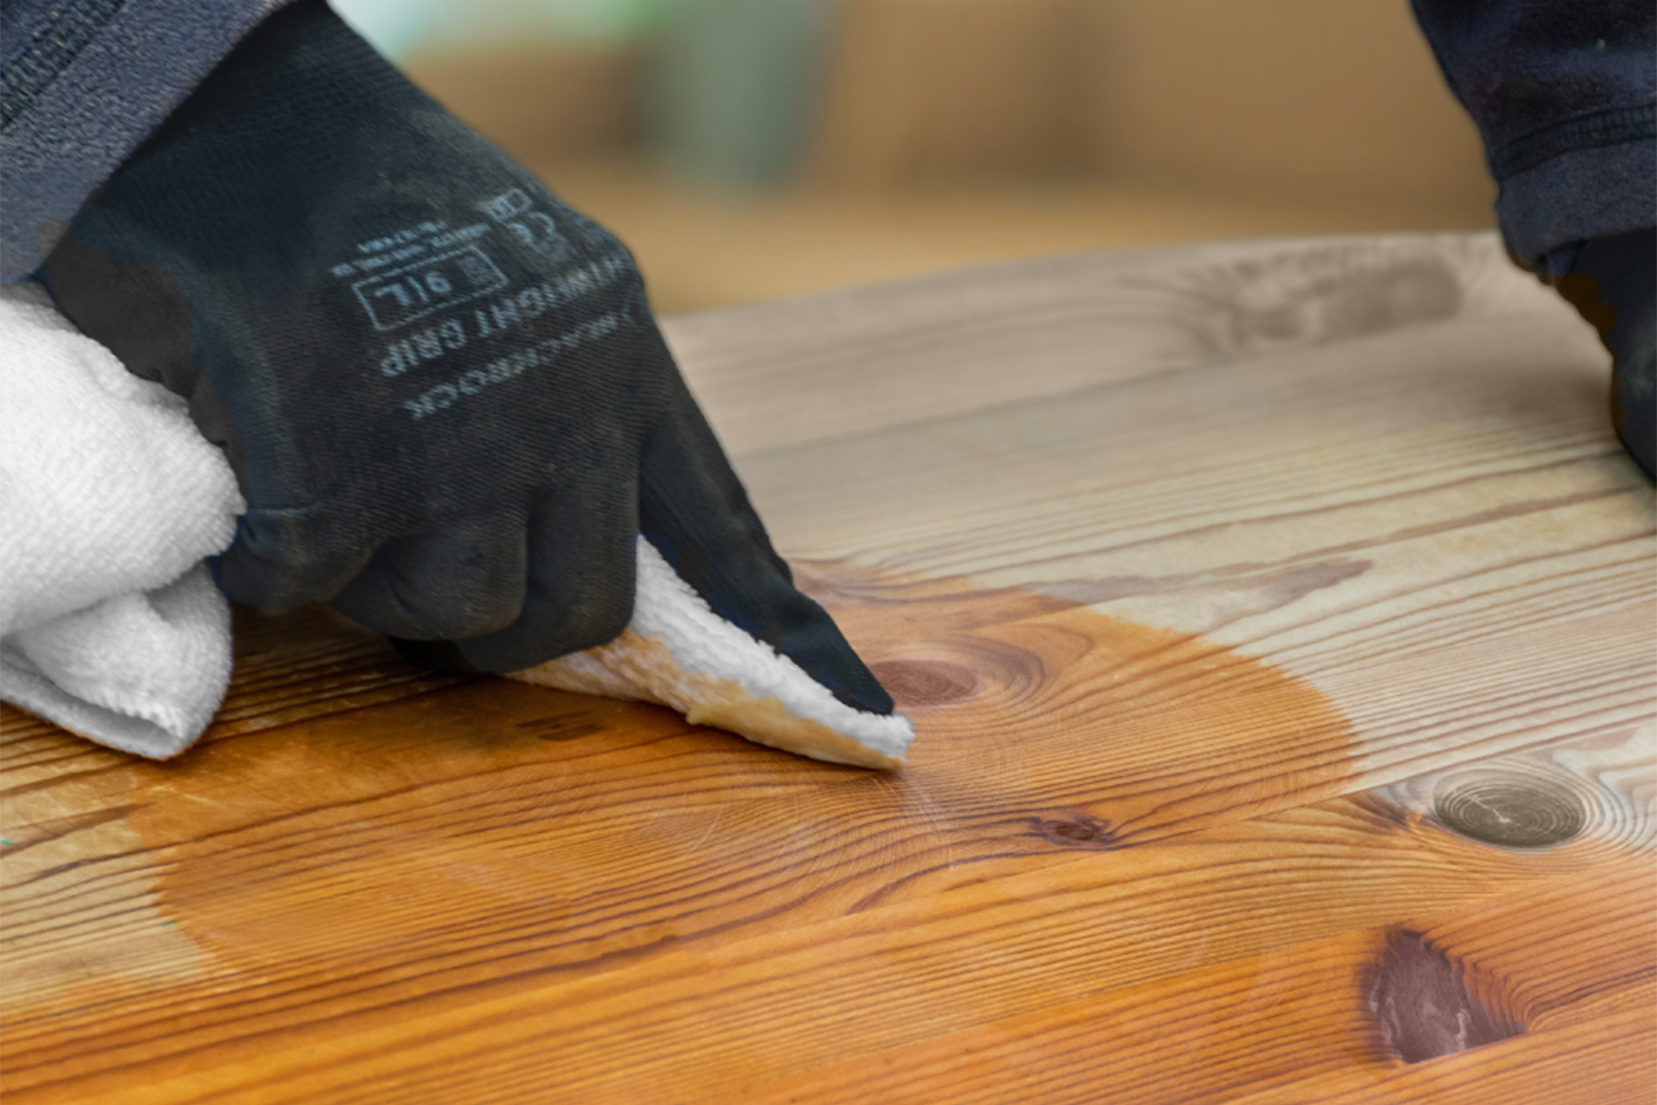 Care for Your Wood Furniture with Waxes Formulated for the Purpose